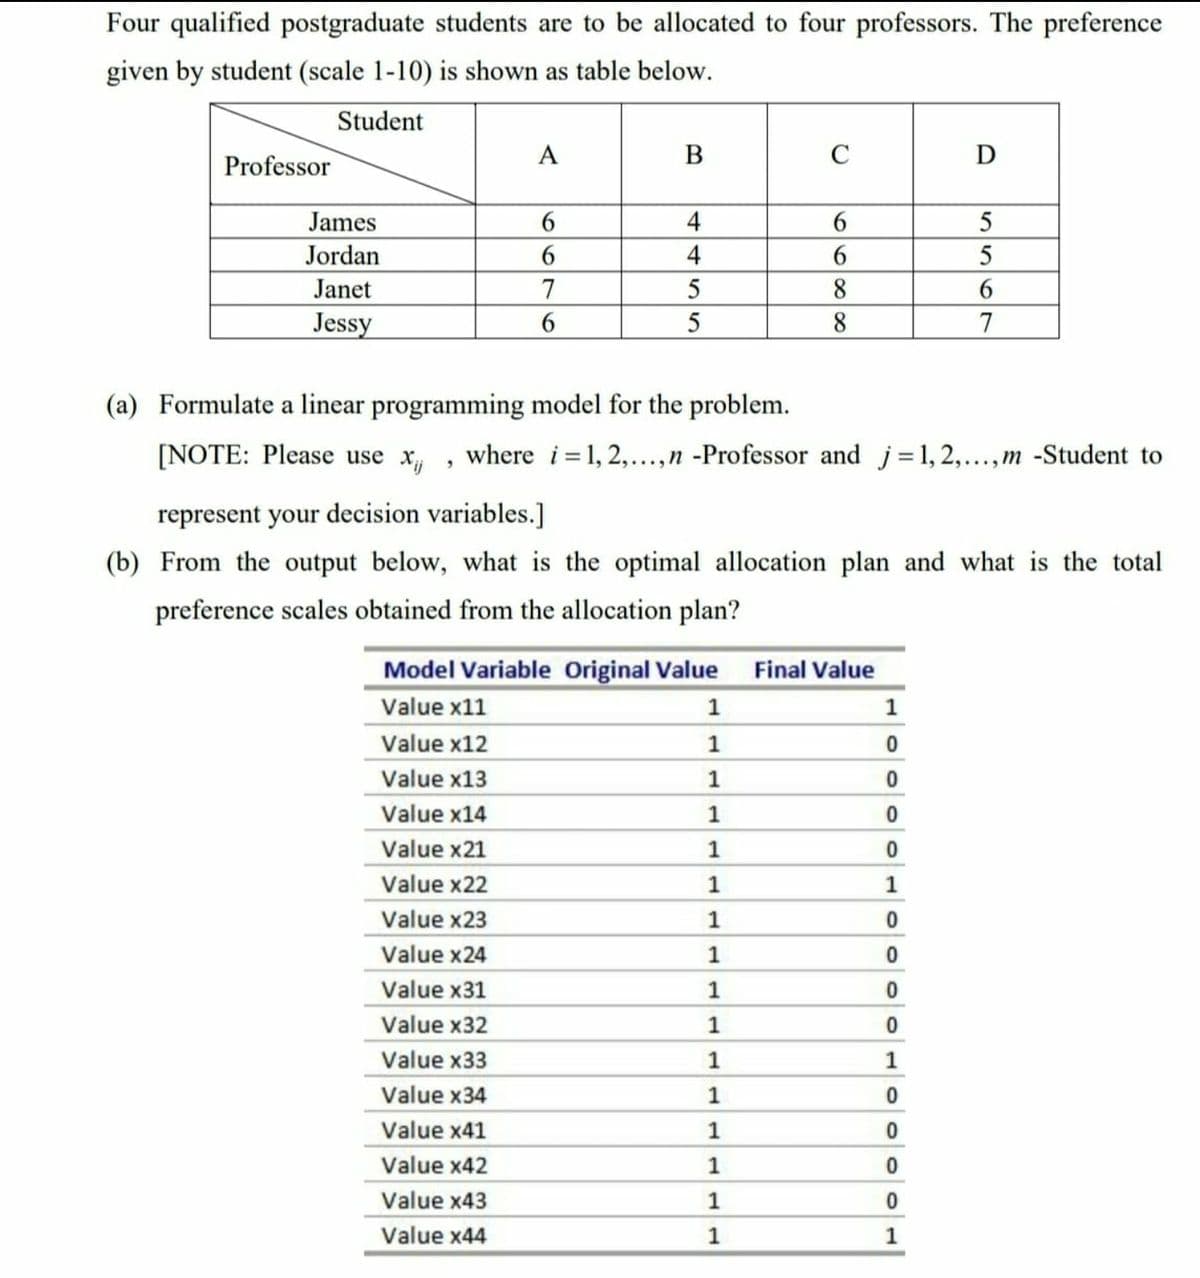 Four qualified postgraduate students are to be allocated to four professors. The preference
given by student (scale 1-10) is shown as table below.
Student
A
В
C
D
Professor
James
Jordan
Janet
7
8
6.
Jessy
5
8.
7
(a) Formulate a linear programming model for the problem.
[NOTE: Please use x,
where i = 1, 2,...,n -Professor and j=1, 2,...,m -Student to
represent your decision variables.]
(b) From the output below, what is the optimal allocation plan and what is the total
preference scales obtained from the allocation plan?
Model Variable Original Value
Final Value
Value x11
1
1
Value x12
1
Value x13
1
Value x14
Value x21
Value x22
Value x23
1
1
1
1
1
Value x24
1
Value x31
Value x32
Value x33
1
1
1
1
Value x34
1
Value x41
1
Value x42
1
Value x43
1
Value x44
1
1
699
445
